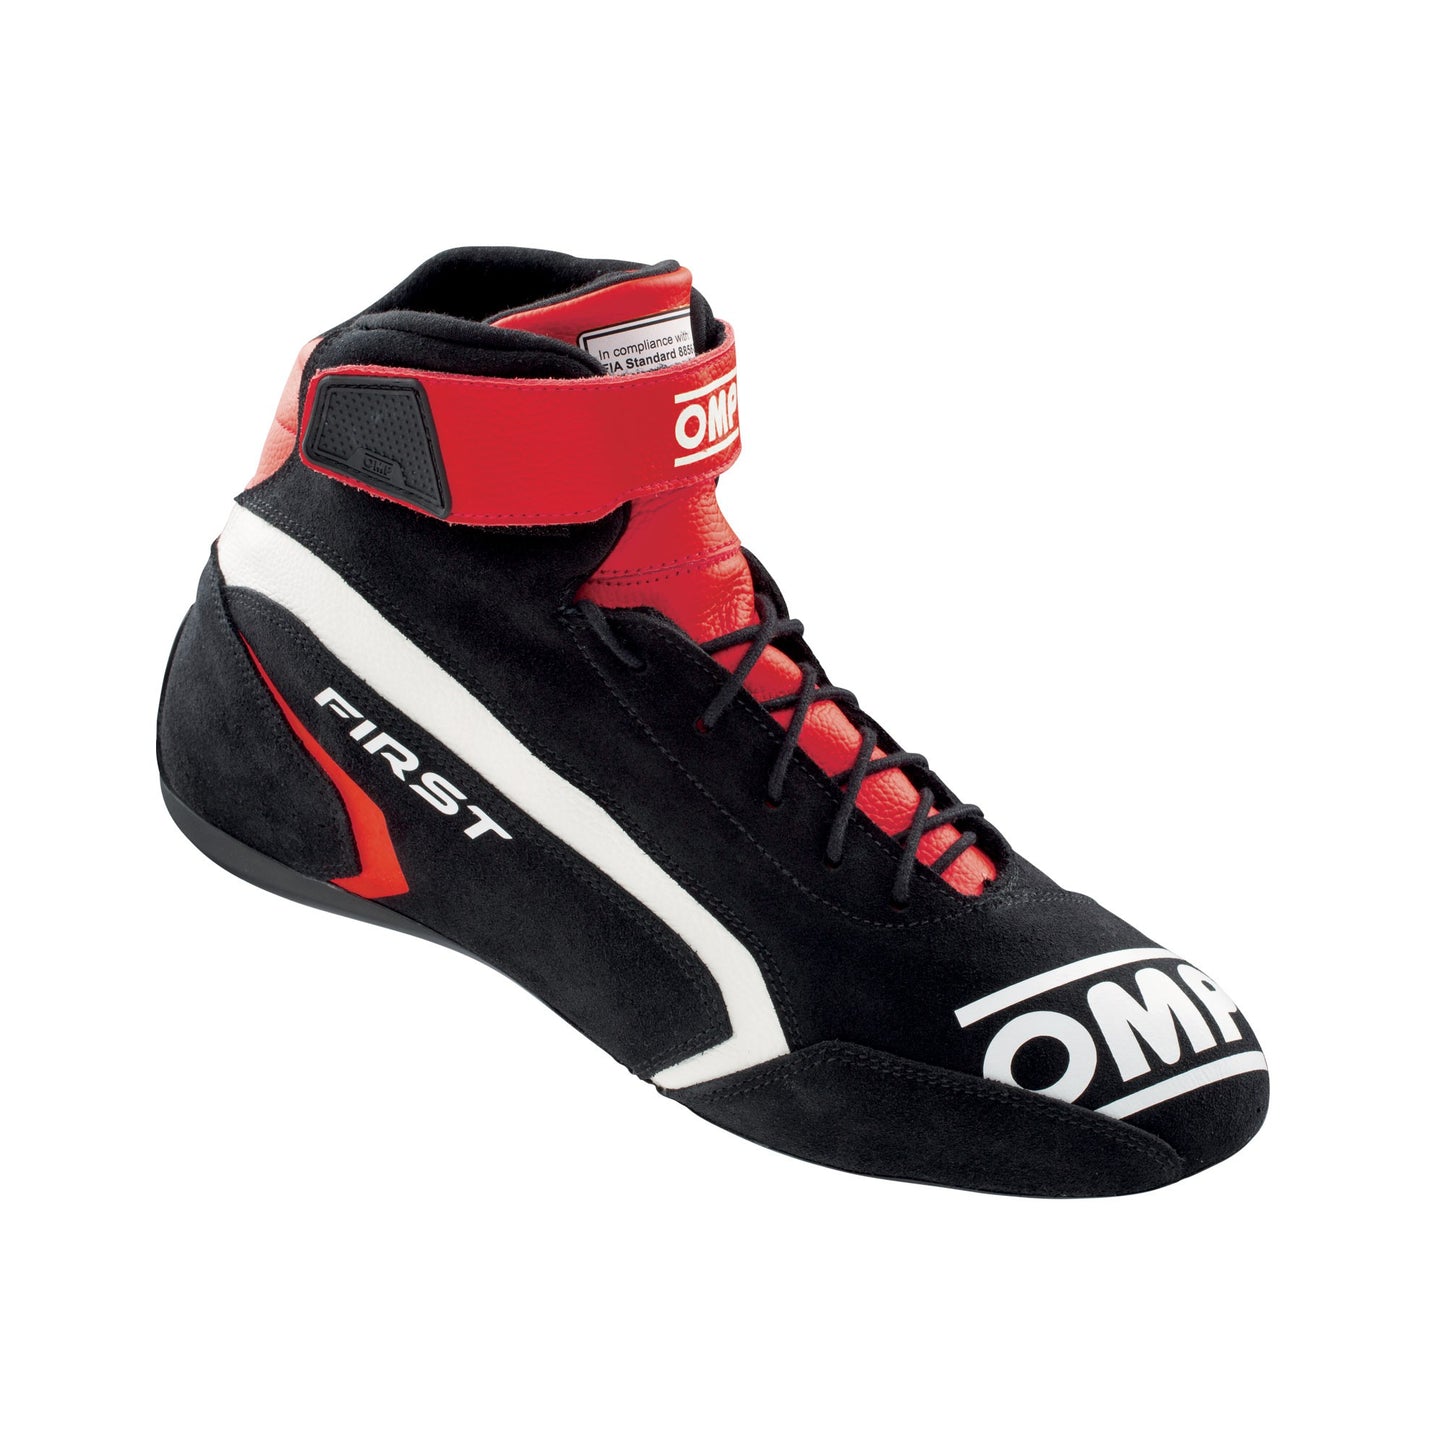 OMP FIRST RACE SHOES